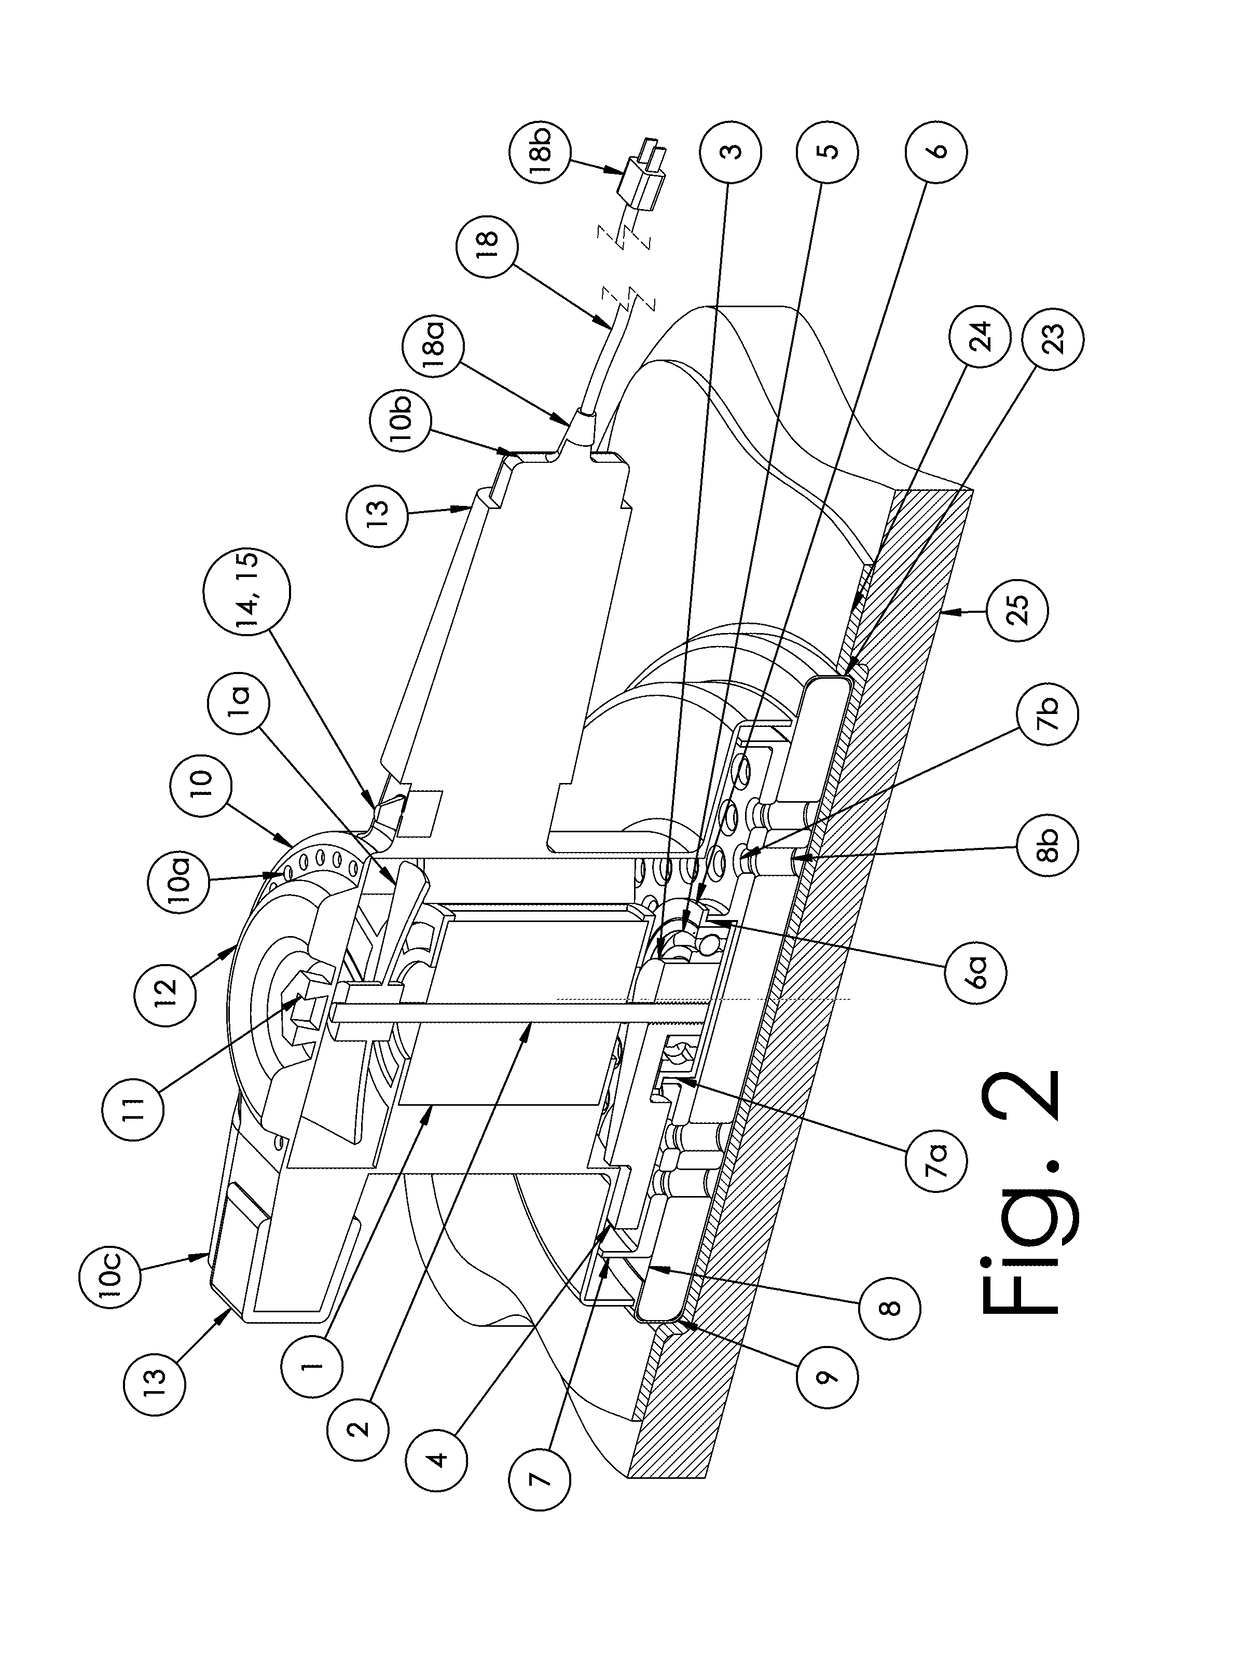 System and method for a deep tissue massager